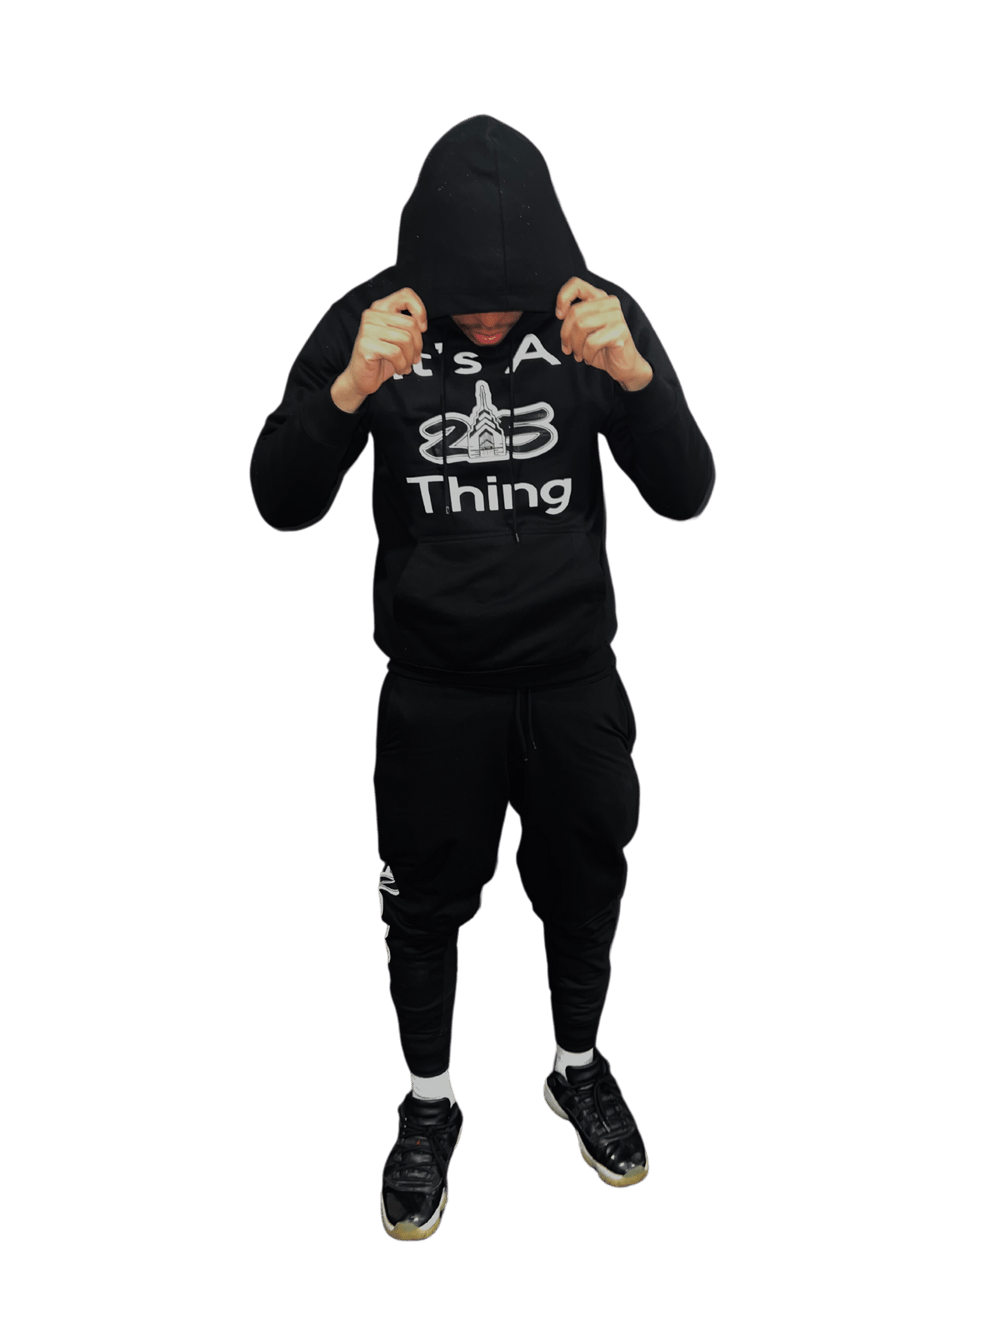 It’s a 215 Thing Hoodie 